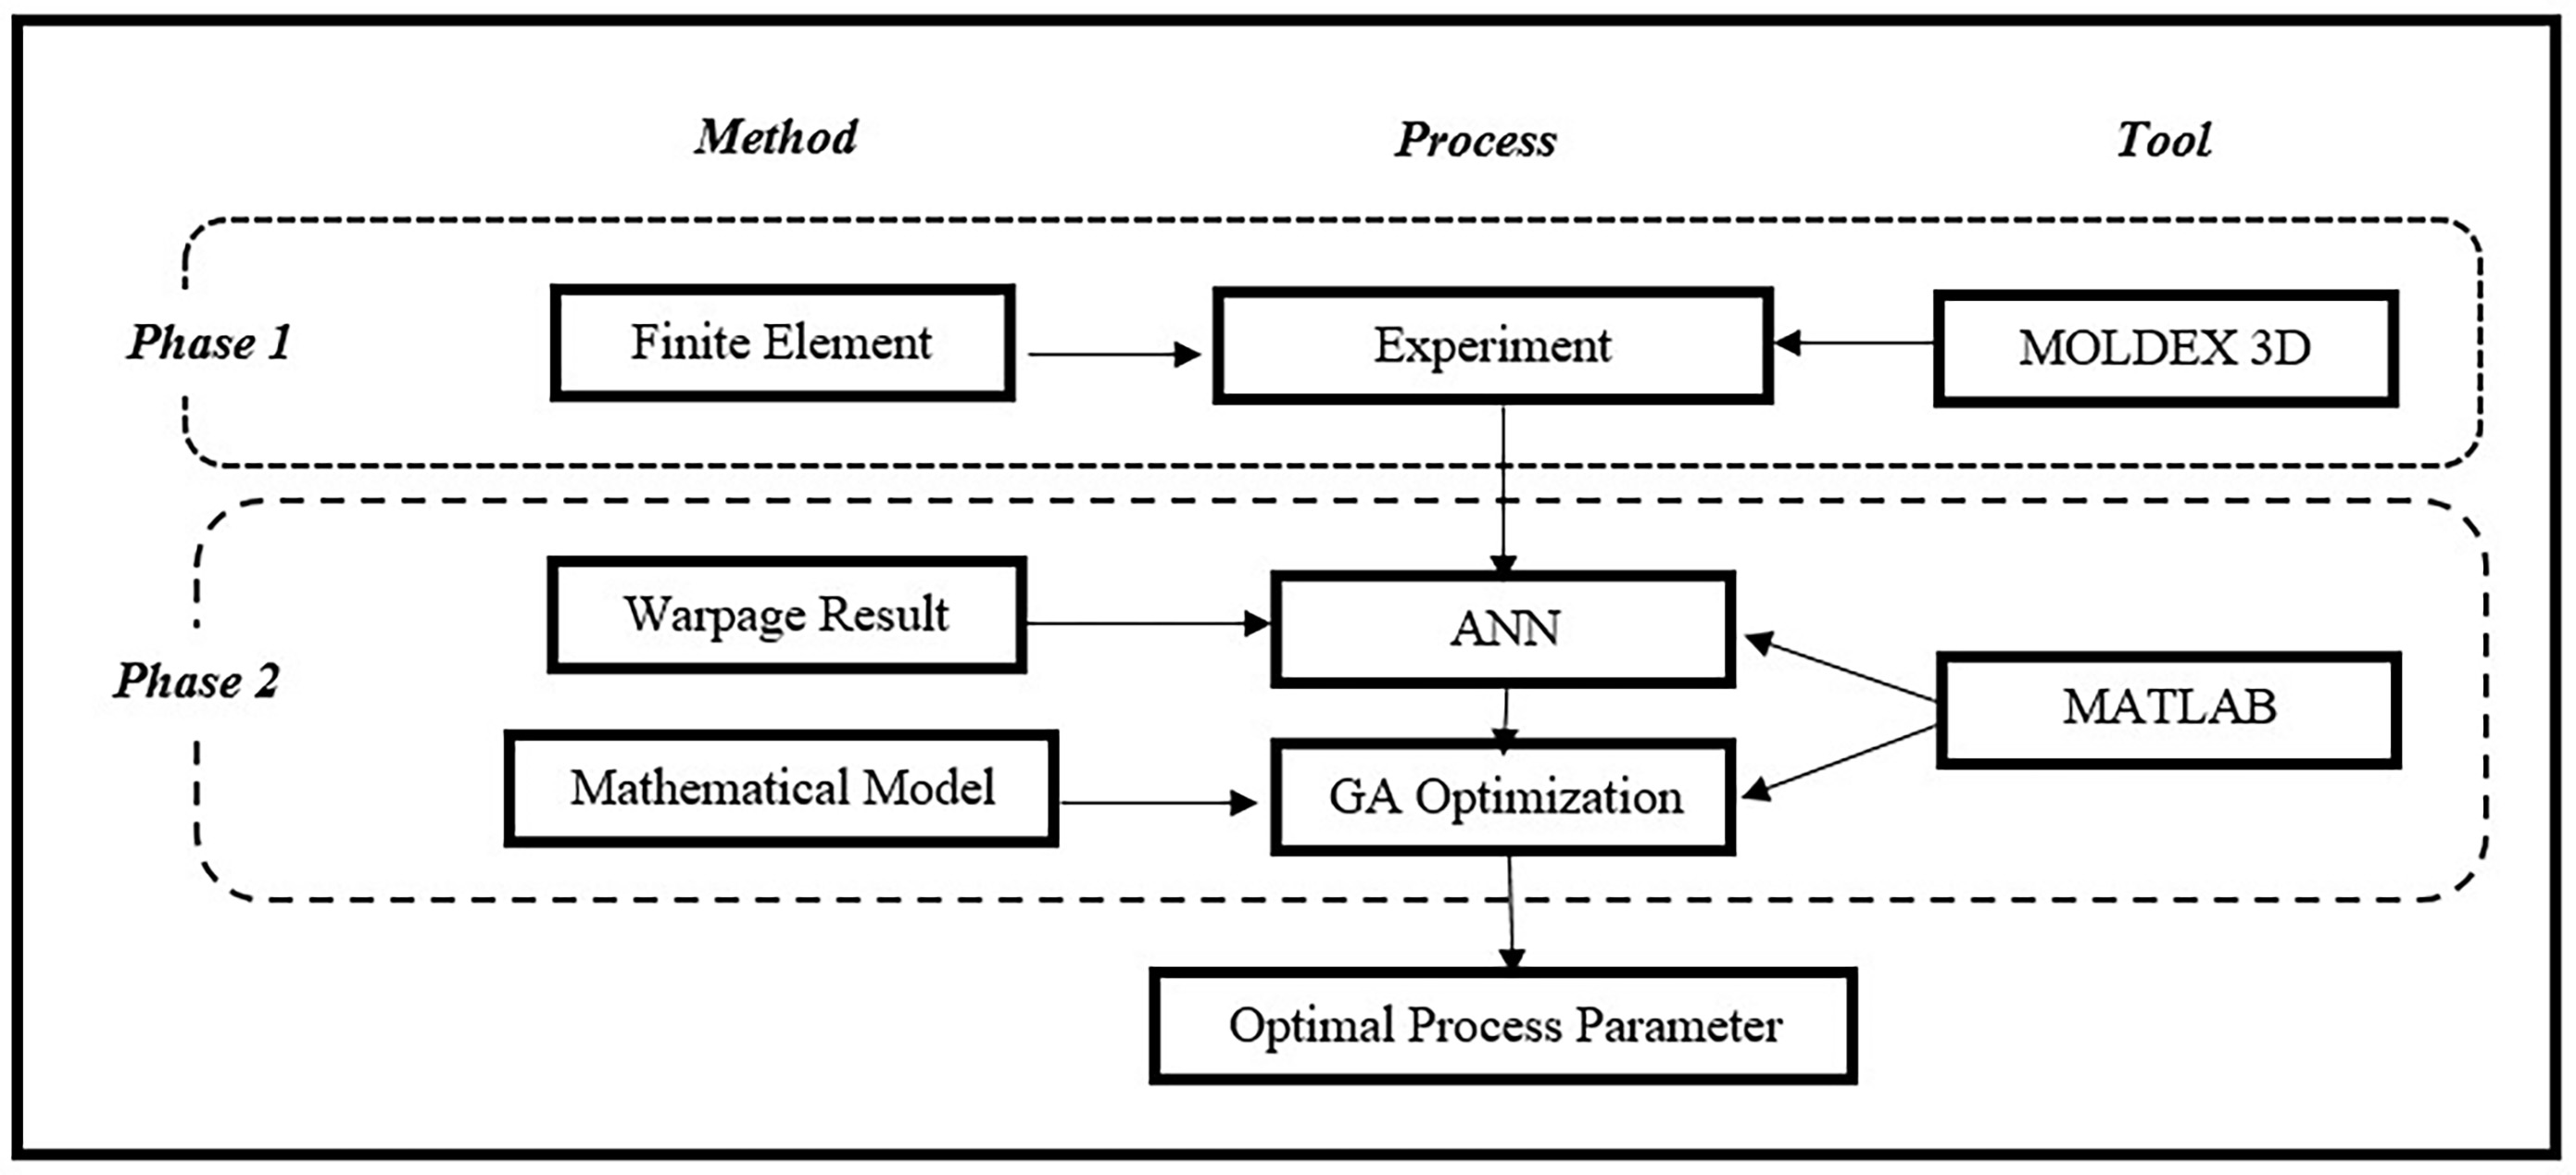 Simulation-Based Optimization of Injection Molding Process Parameters for Minimizing Warpage by ANN and GA